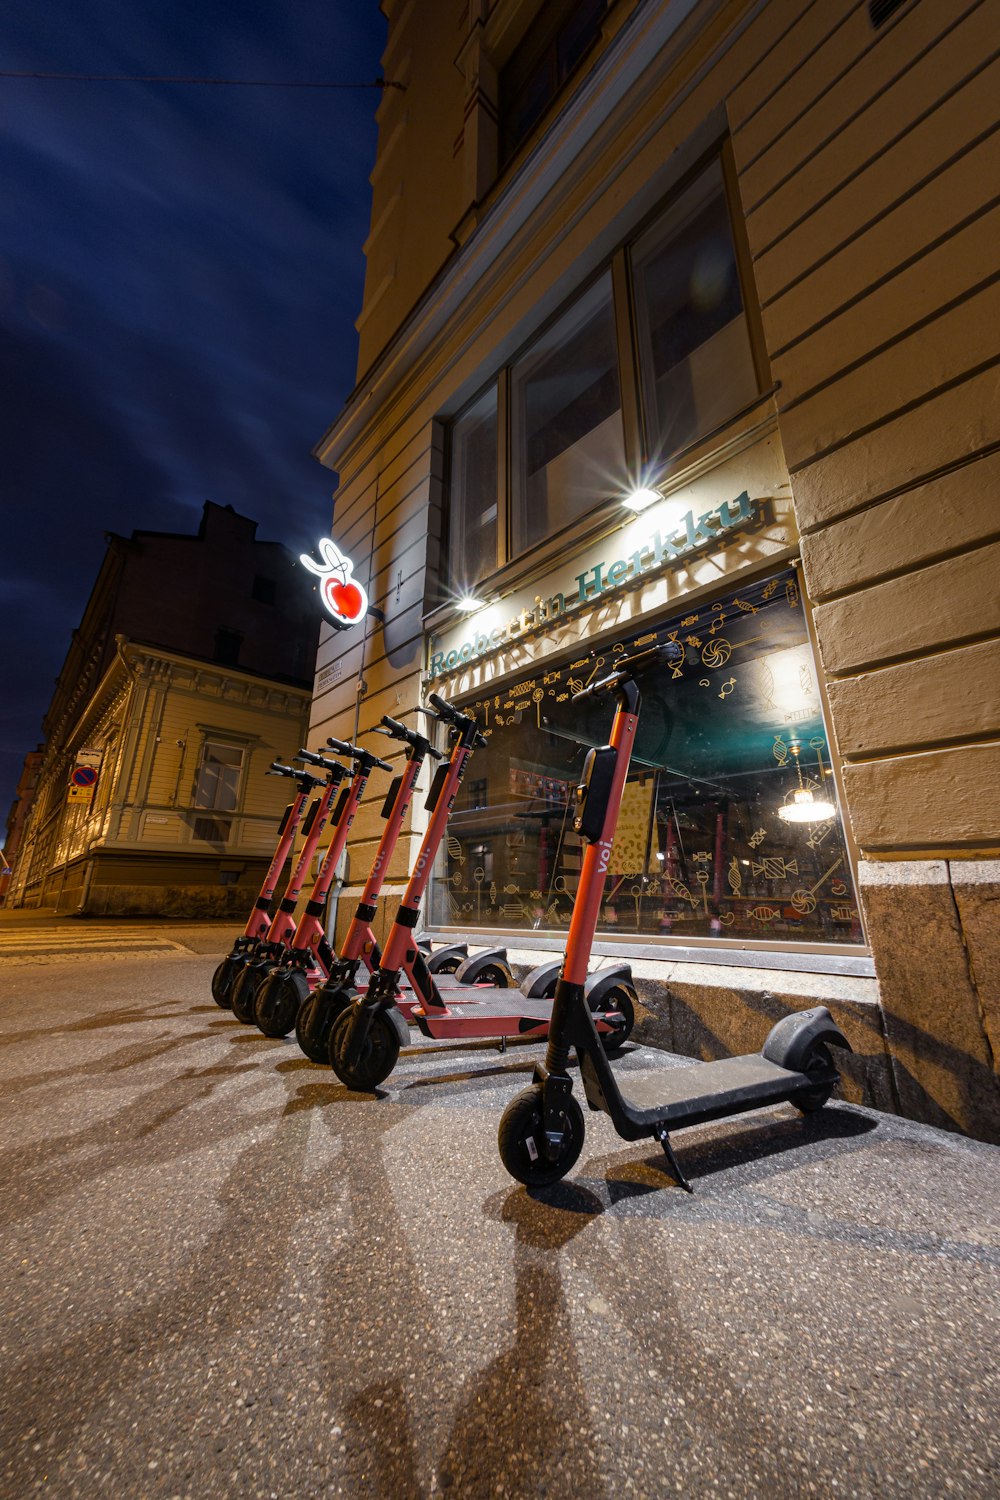 red and black kick scooter beside brown concrete building during nighttime